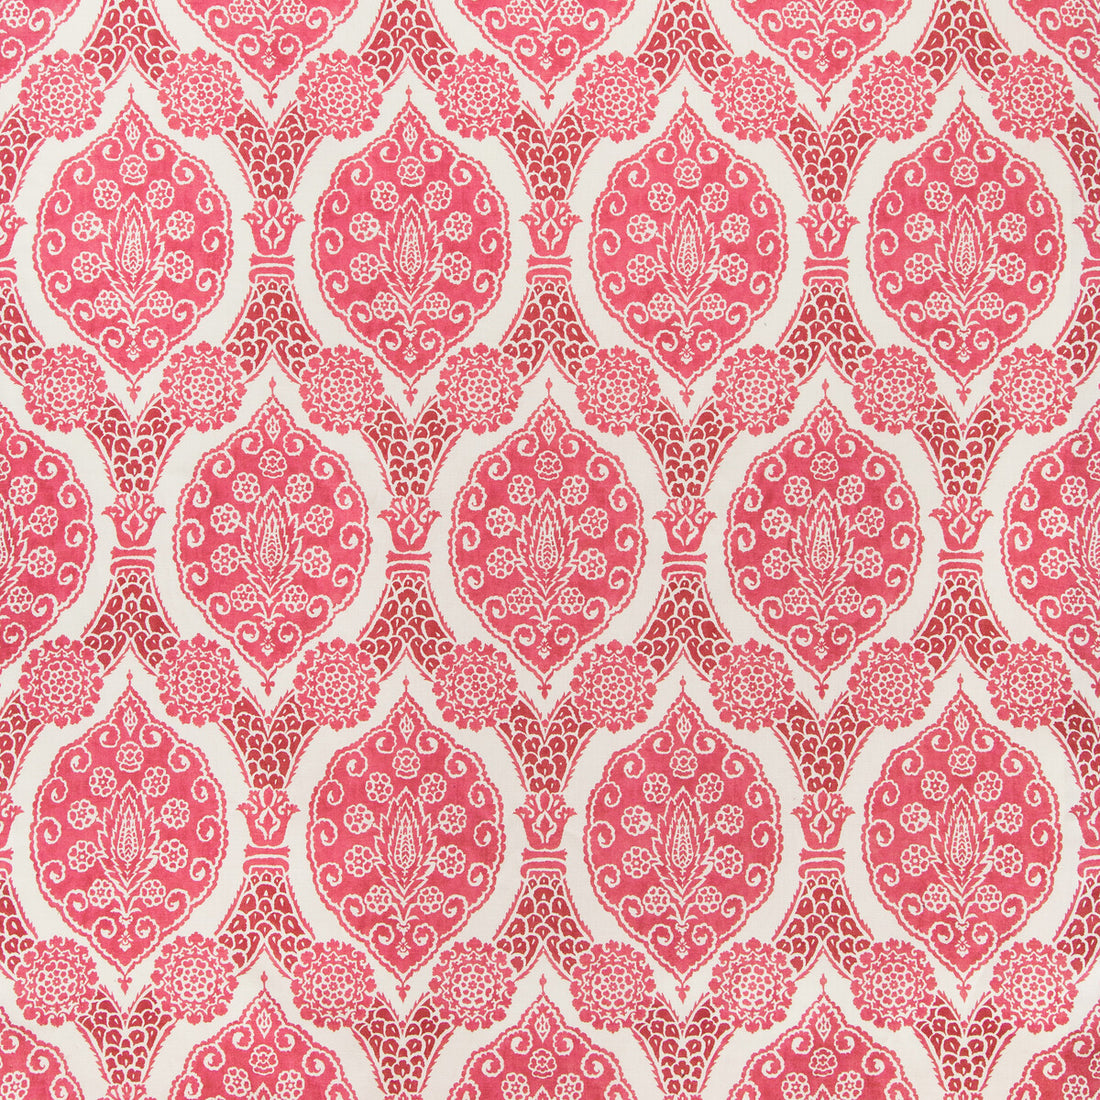 Sufera Print fabric in pink color - pattern 8020103.7.0 - by Brunschwig &amp; Fils in the Grand Bazaar collection